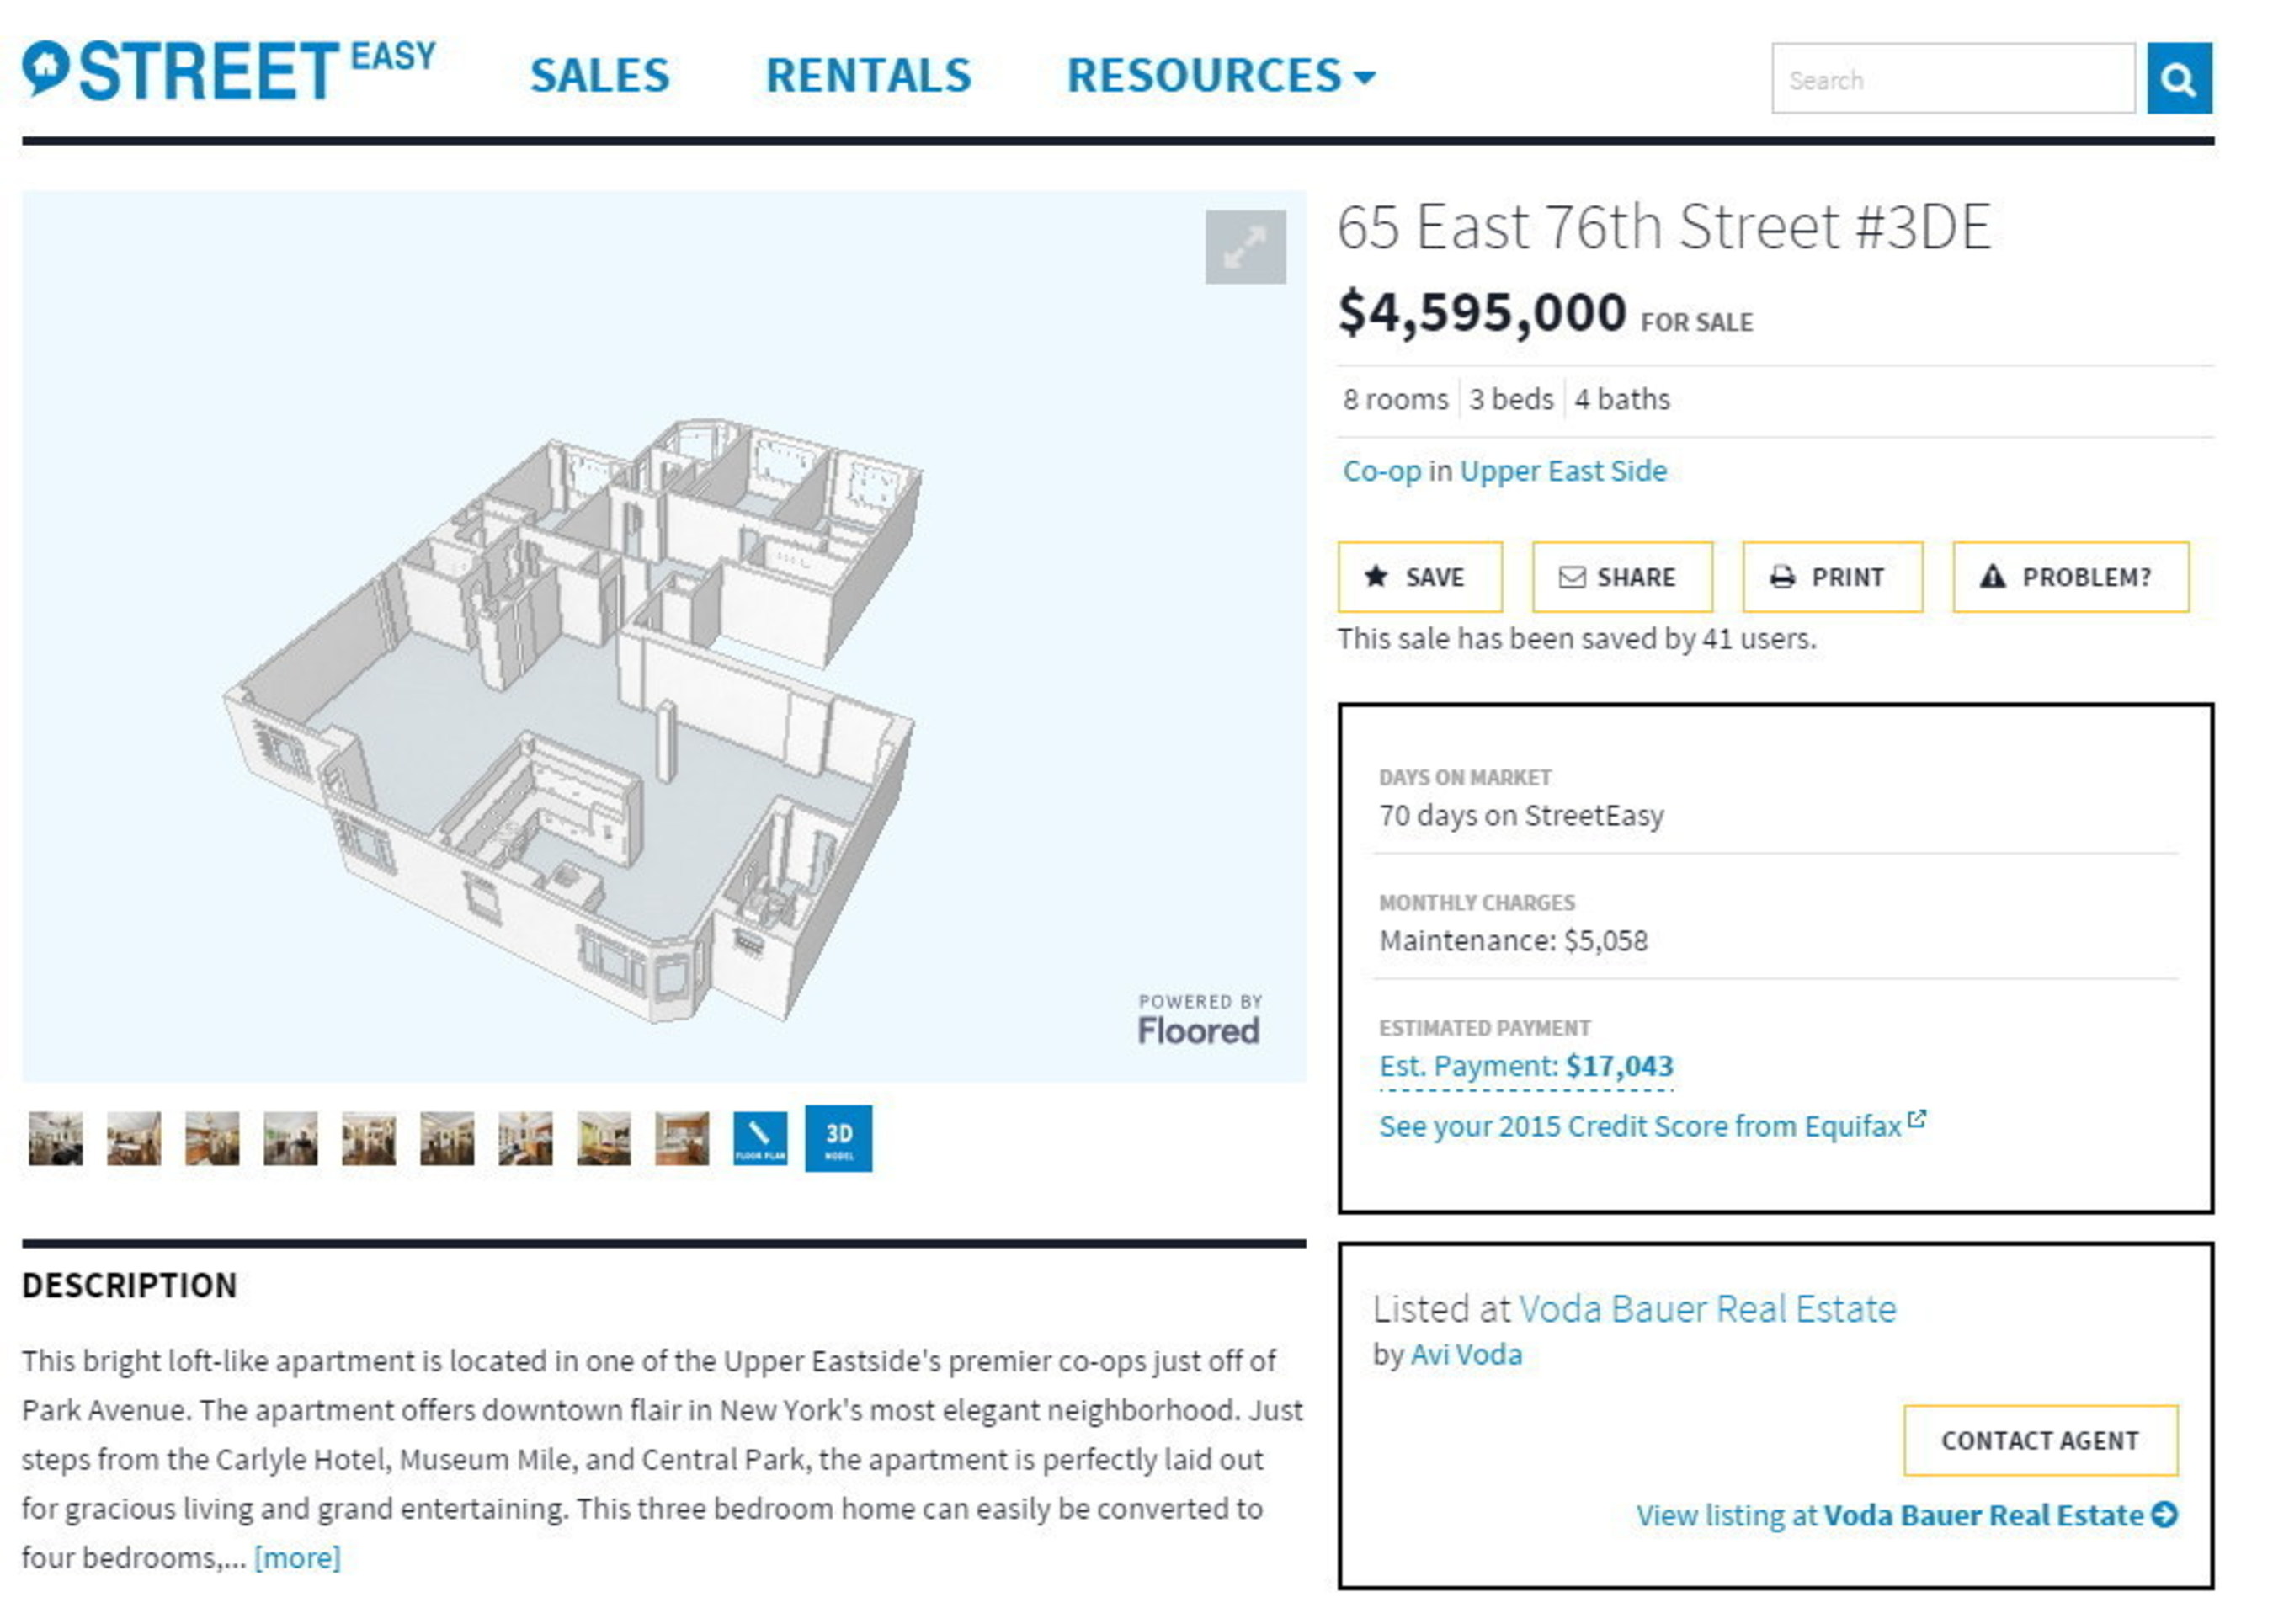 StreetEasy launches new 3-D floor plans for select for-sale listings in New York City.